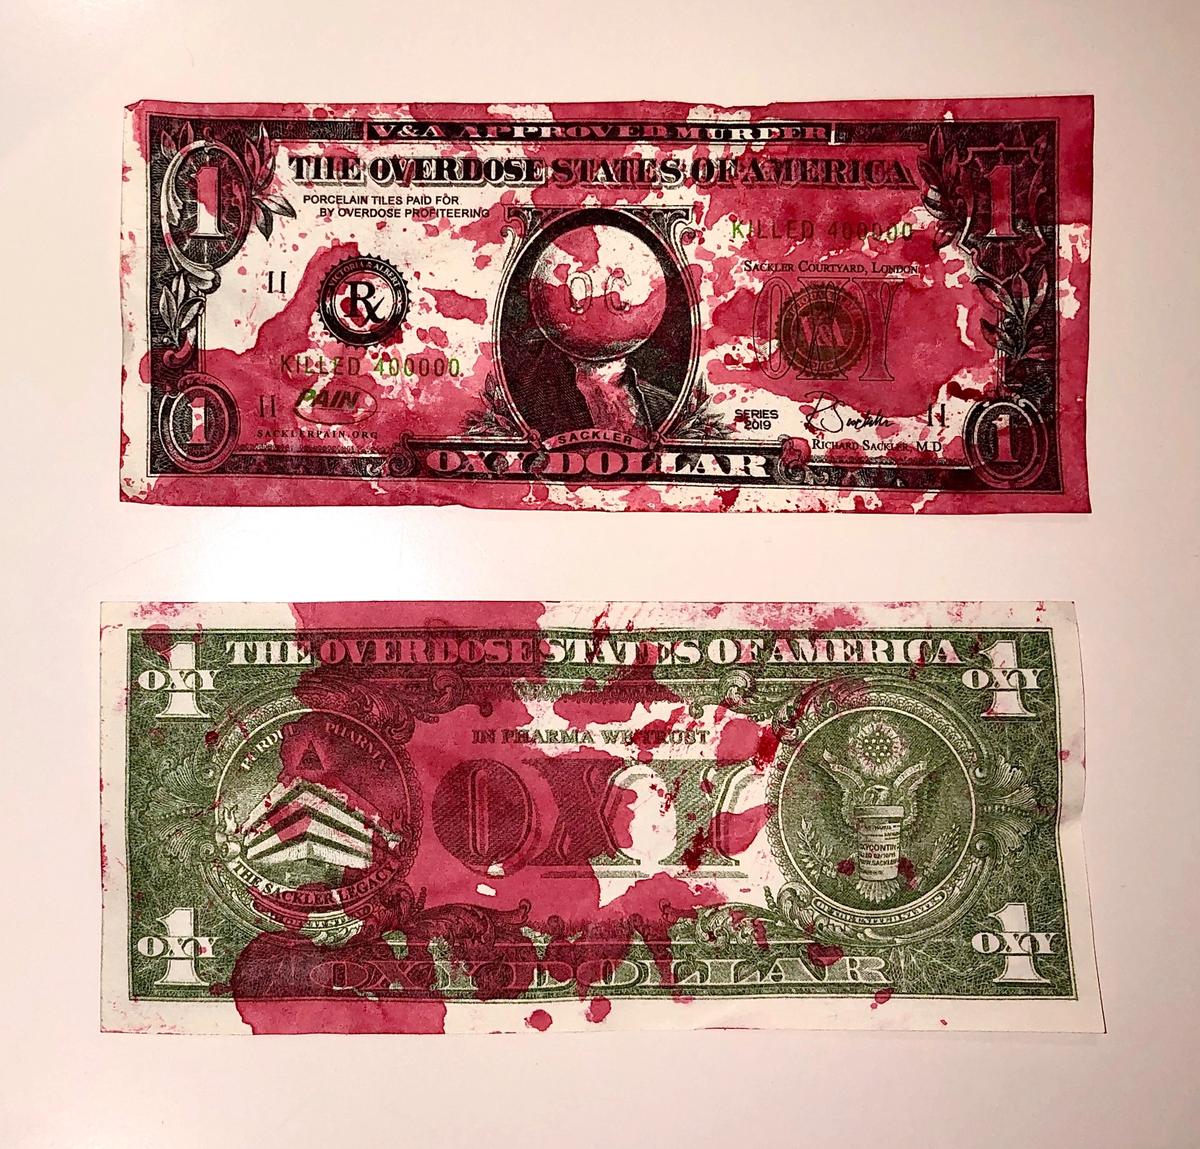 Nan Goldin and activists from the groups PAIN and Truth Pharm tossed blood-soaked dollar bills into the air at protests this year to represent the billions in profits that Purdue and the Sacklers have made from the sale of painkillers over the last two decades Courtesy of PAIN